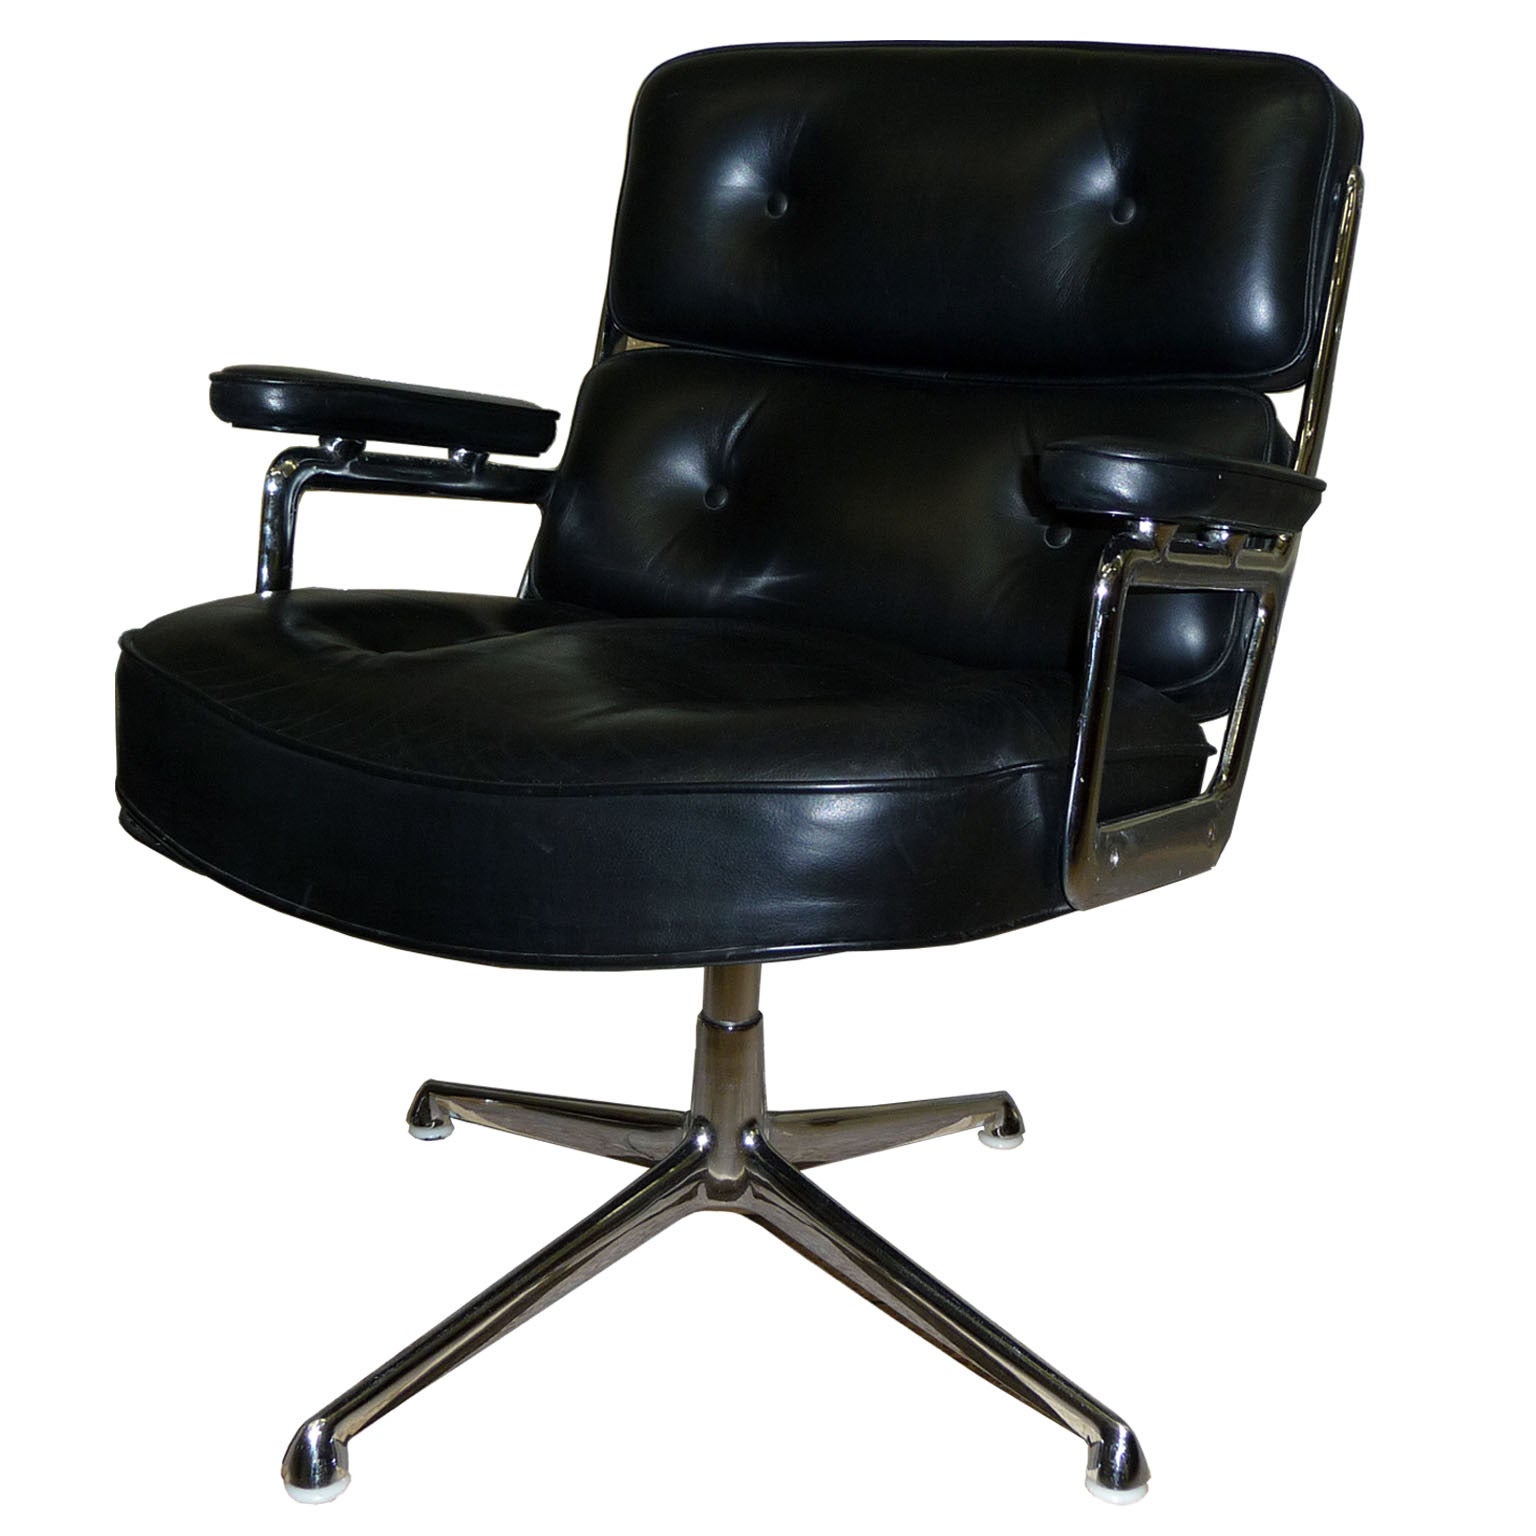 675 Lobby Chair, Charles & Ray Eames for Herman Miller